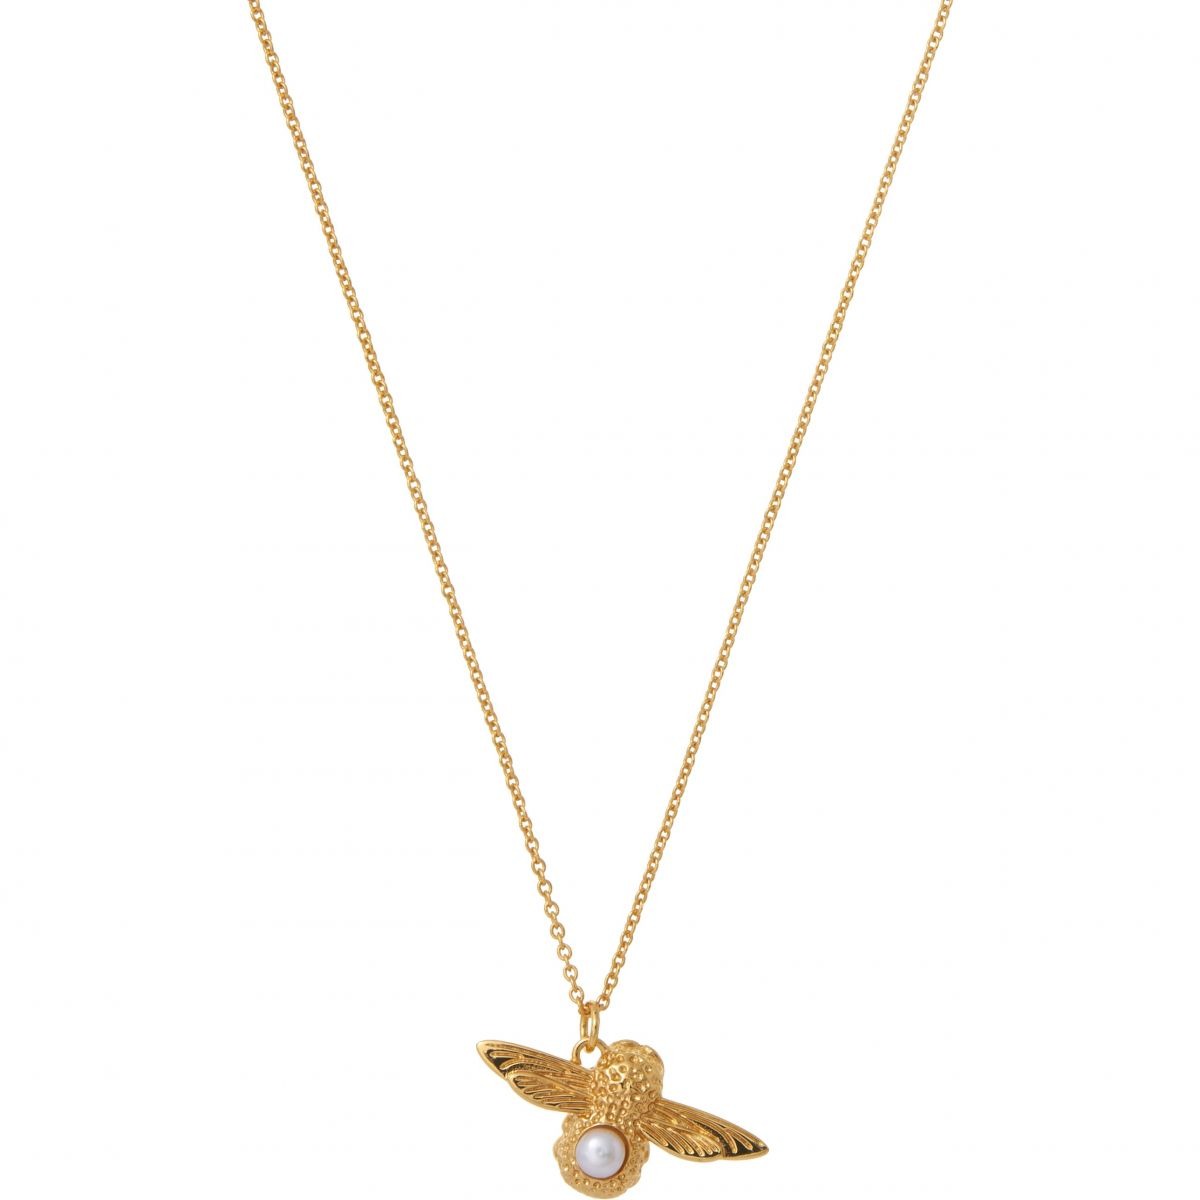 Women's Necklace in Gold by Watch Shop GOOFASH